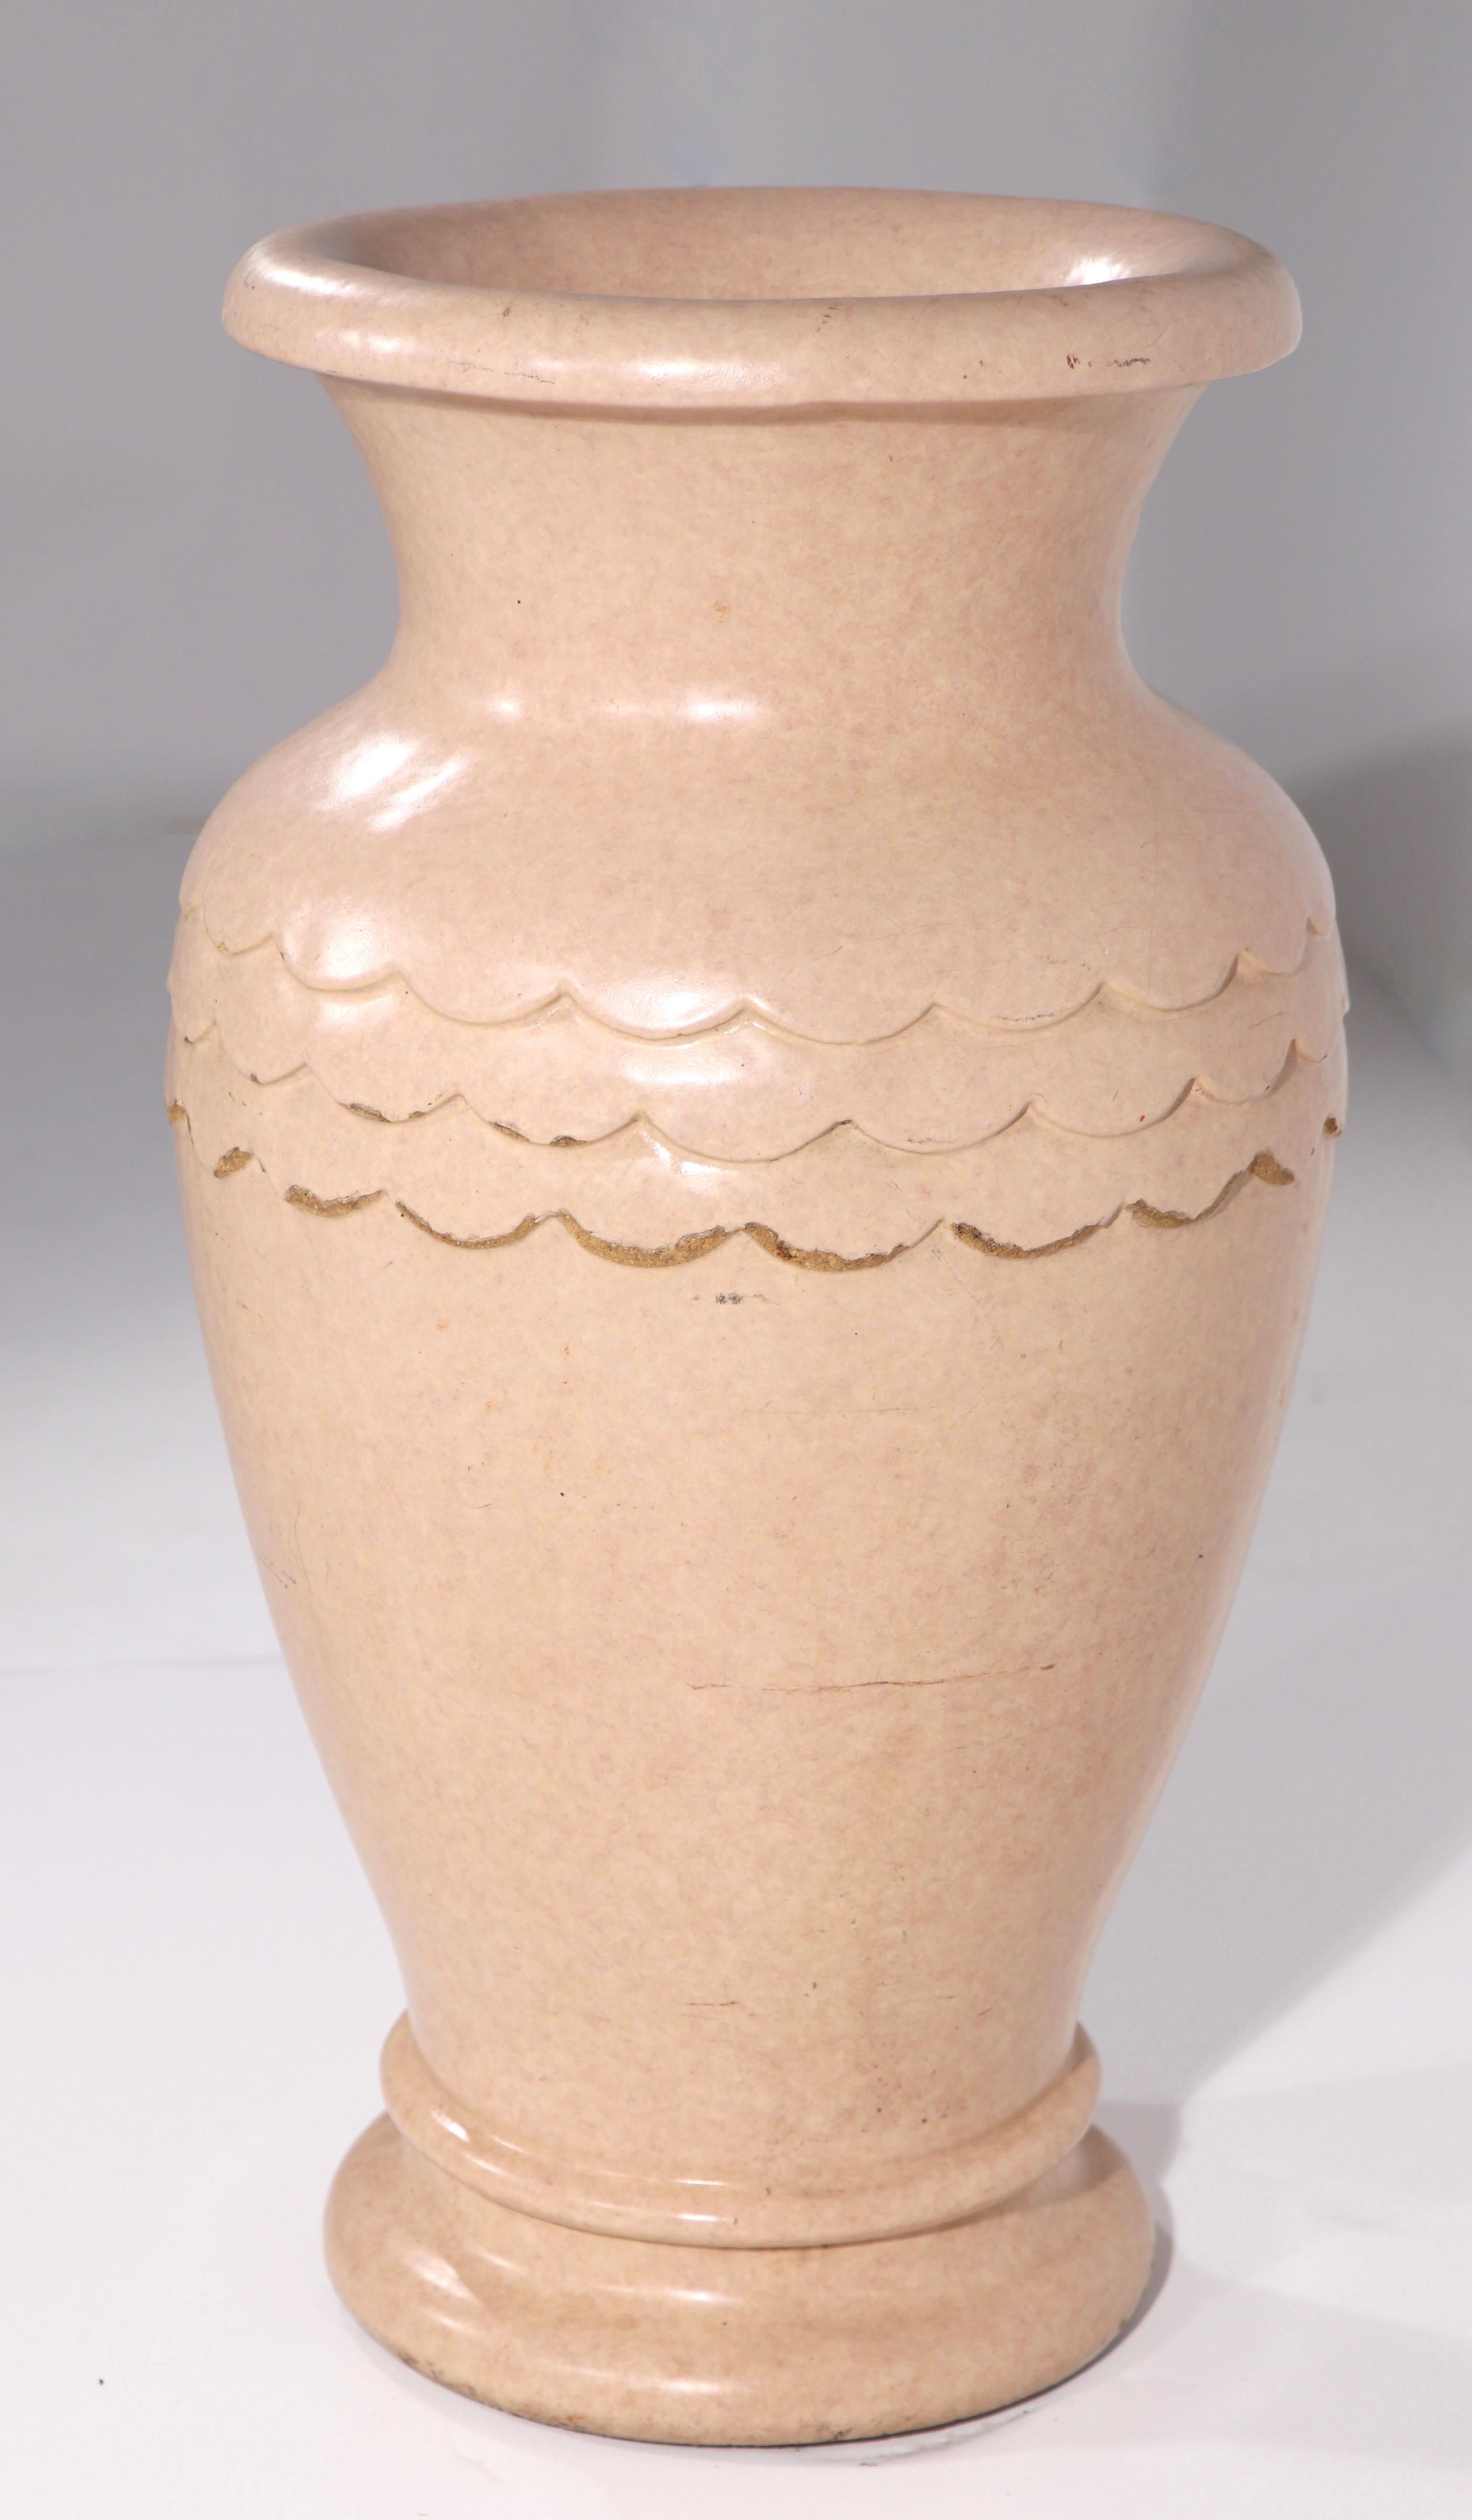 High style Art Deco stoneware urn, floor vase, cane or umbrella stand. This chic piece is marked with a clover mark, and reads Made in Perth Amboy NJ - along with other illegible markings. The urn is in very good, original condition, showing only